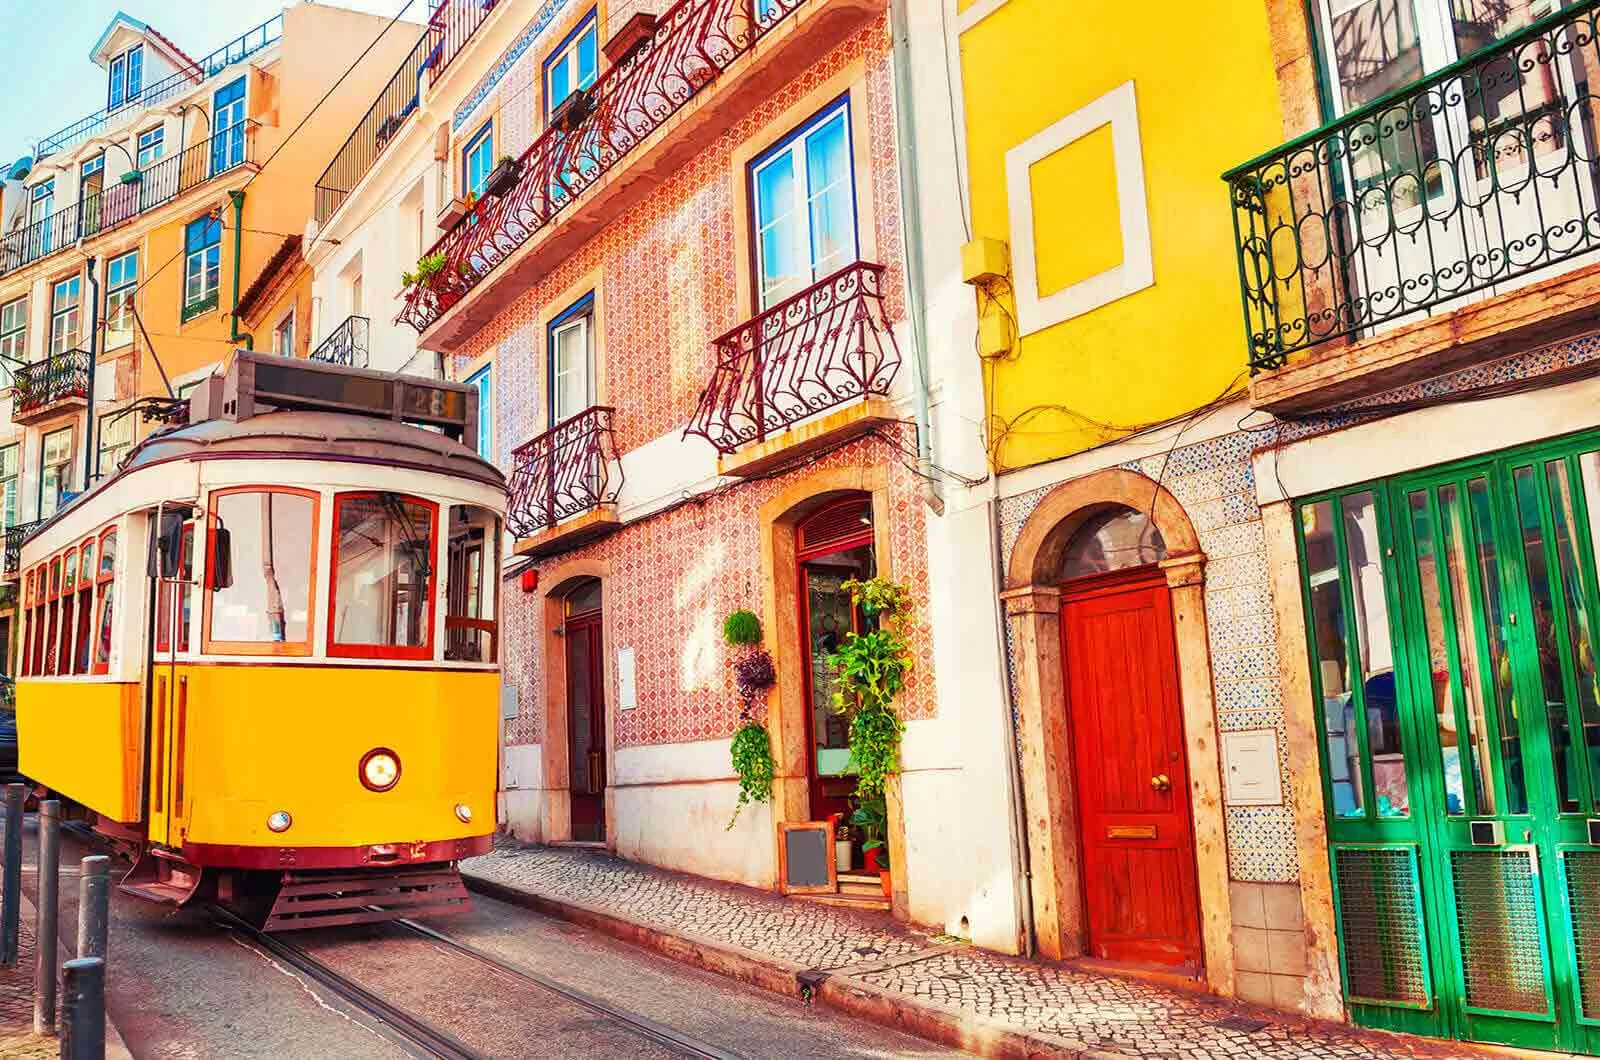 A yellow train in the city centre of Lisbon, Portugal. 